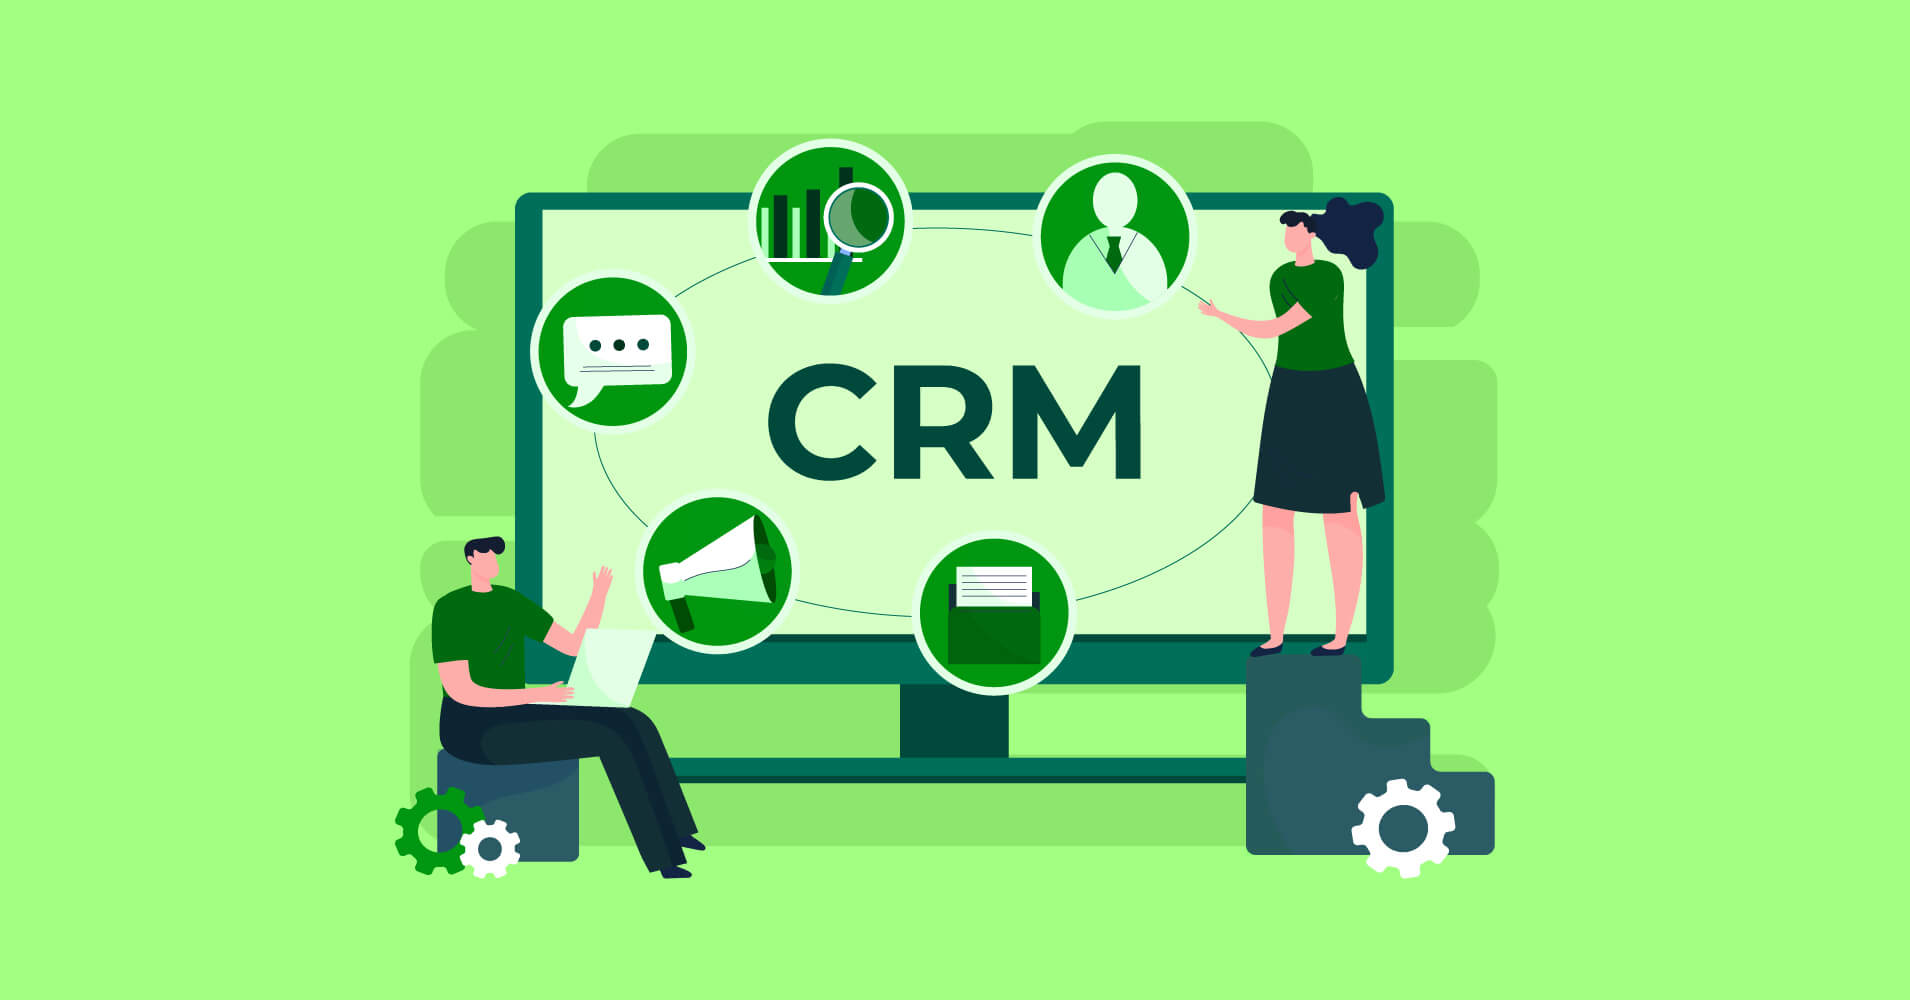 Steps in the CRM Process